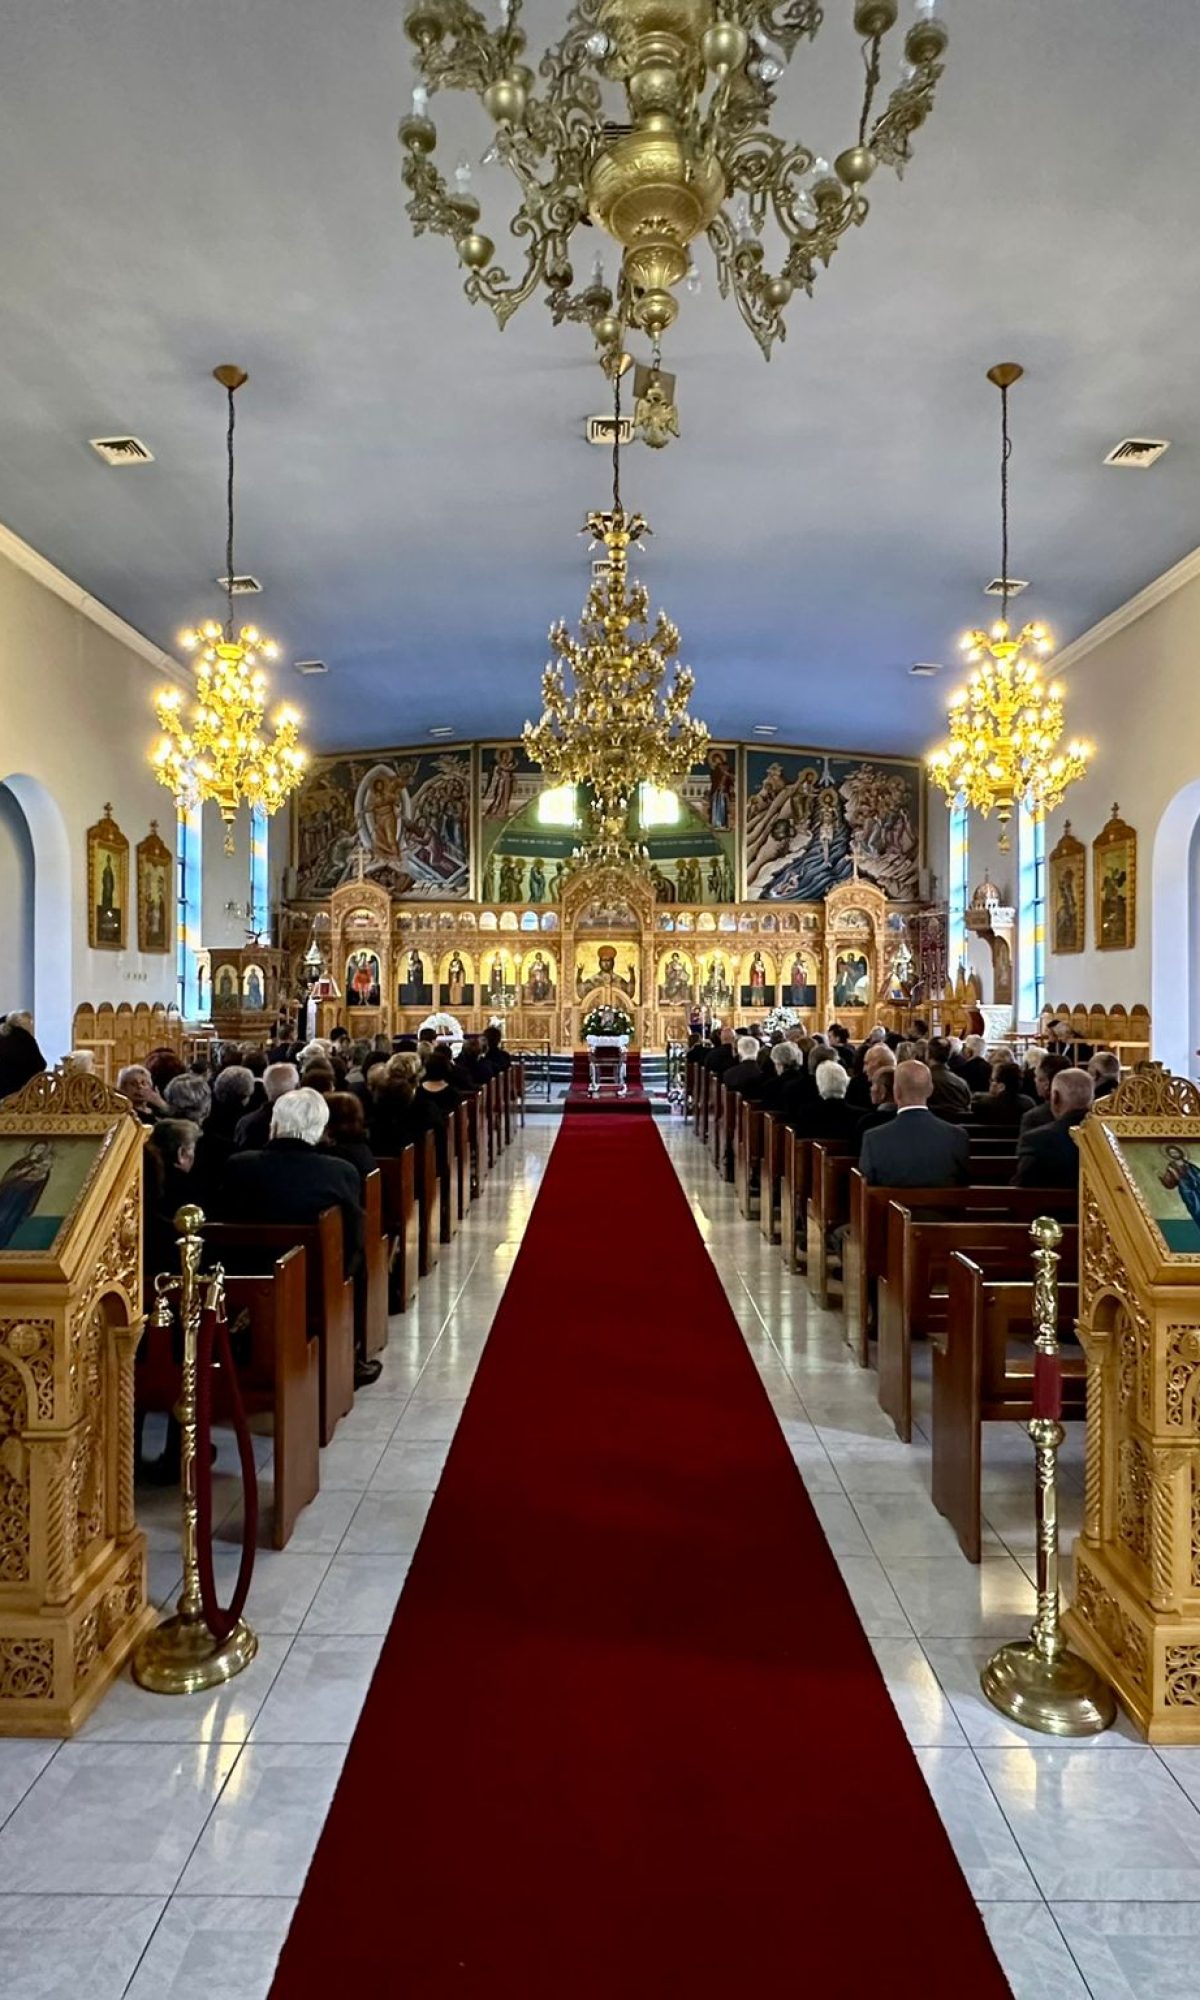 Rear view inside a Greek Orthodox church during a funeral service, showing the congregation and the coffin placed at the front.